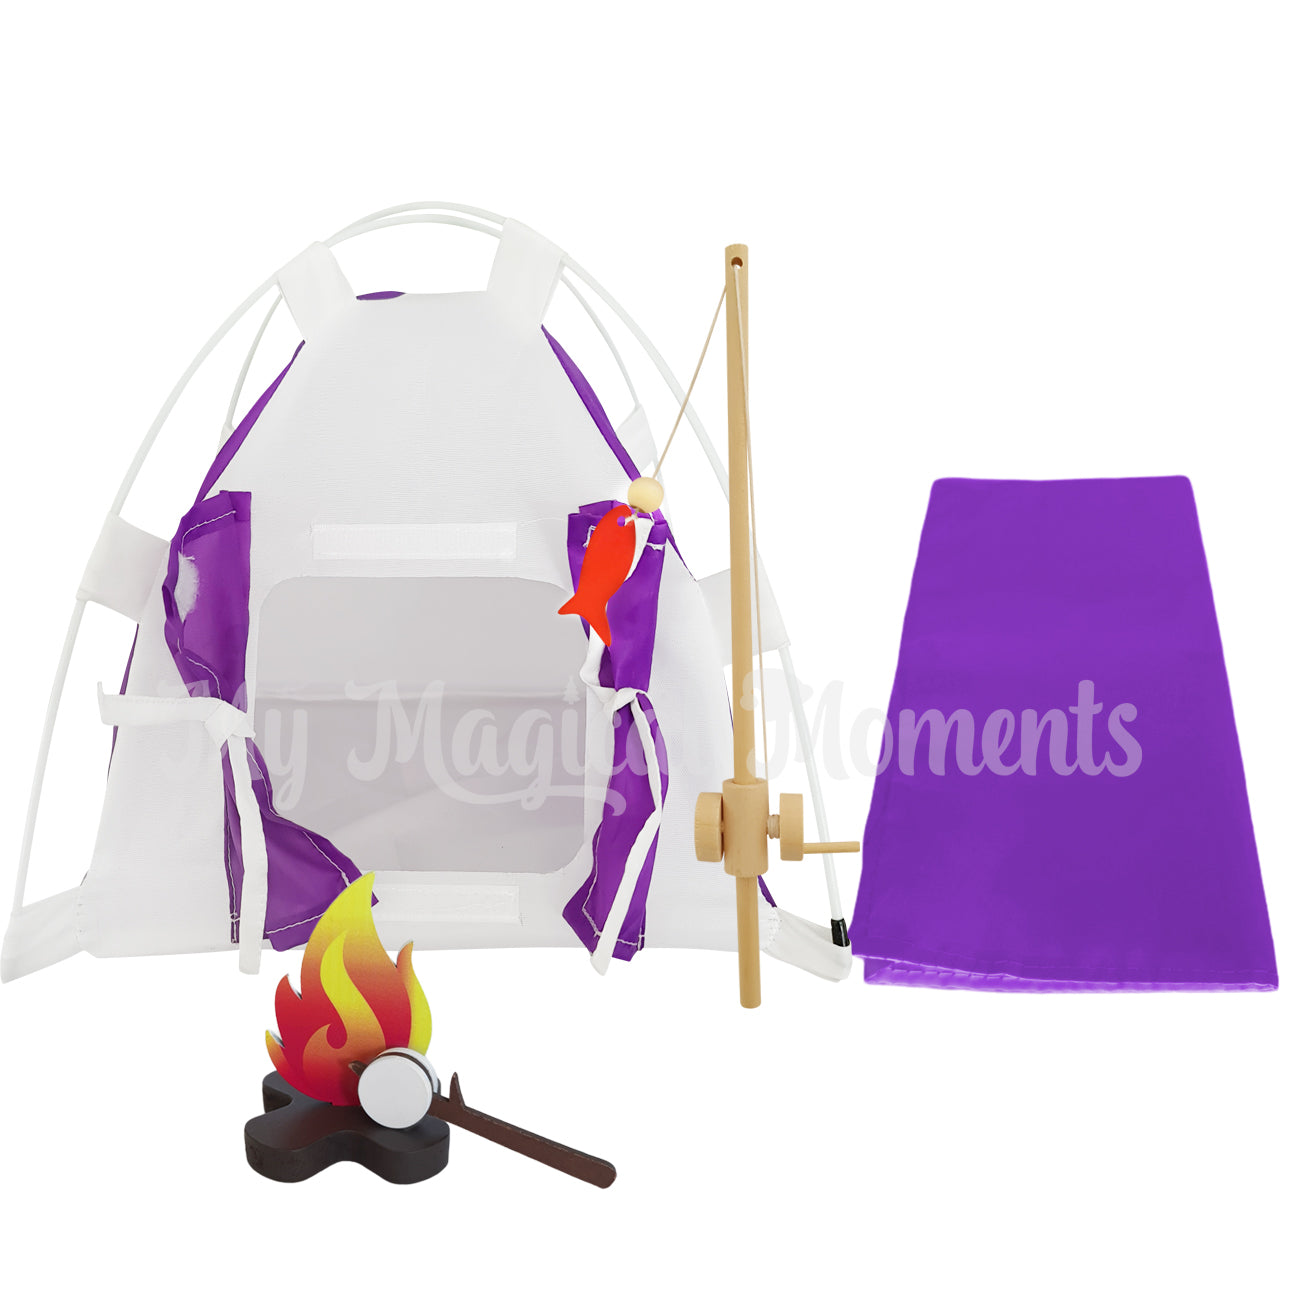 Purple elf camping tent, with miniature sleeping bag, fire pit and fishing rod